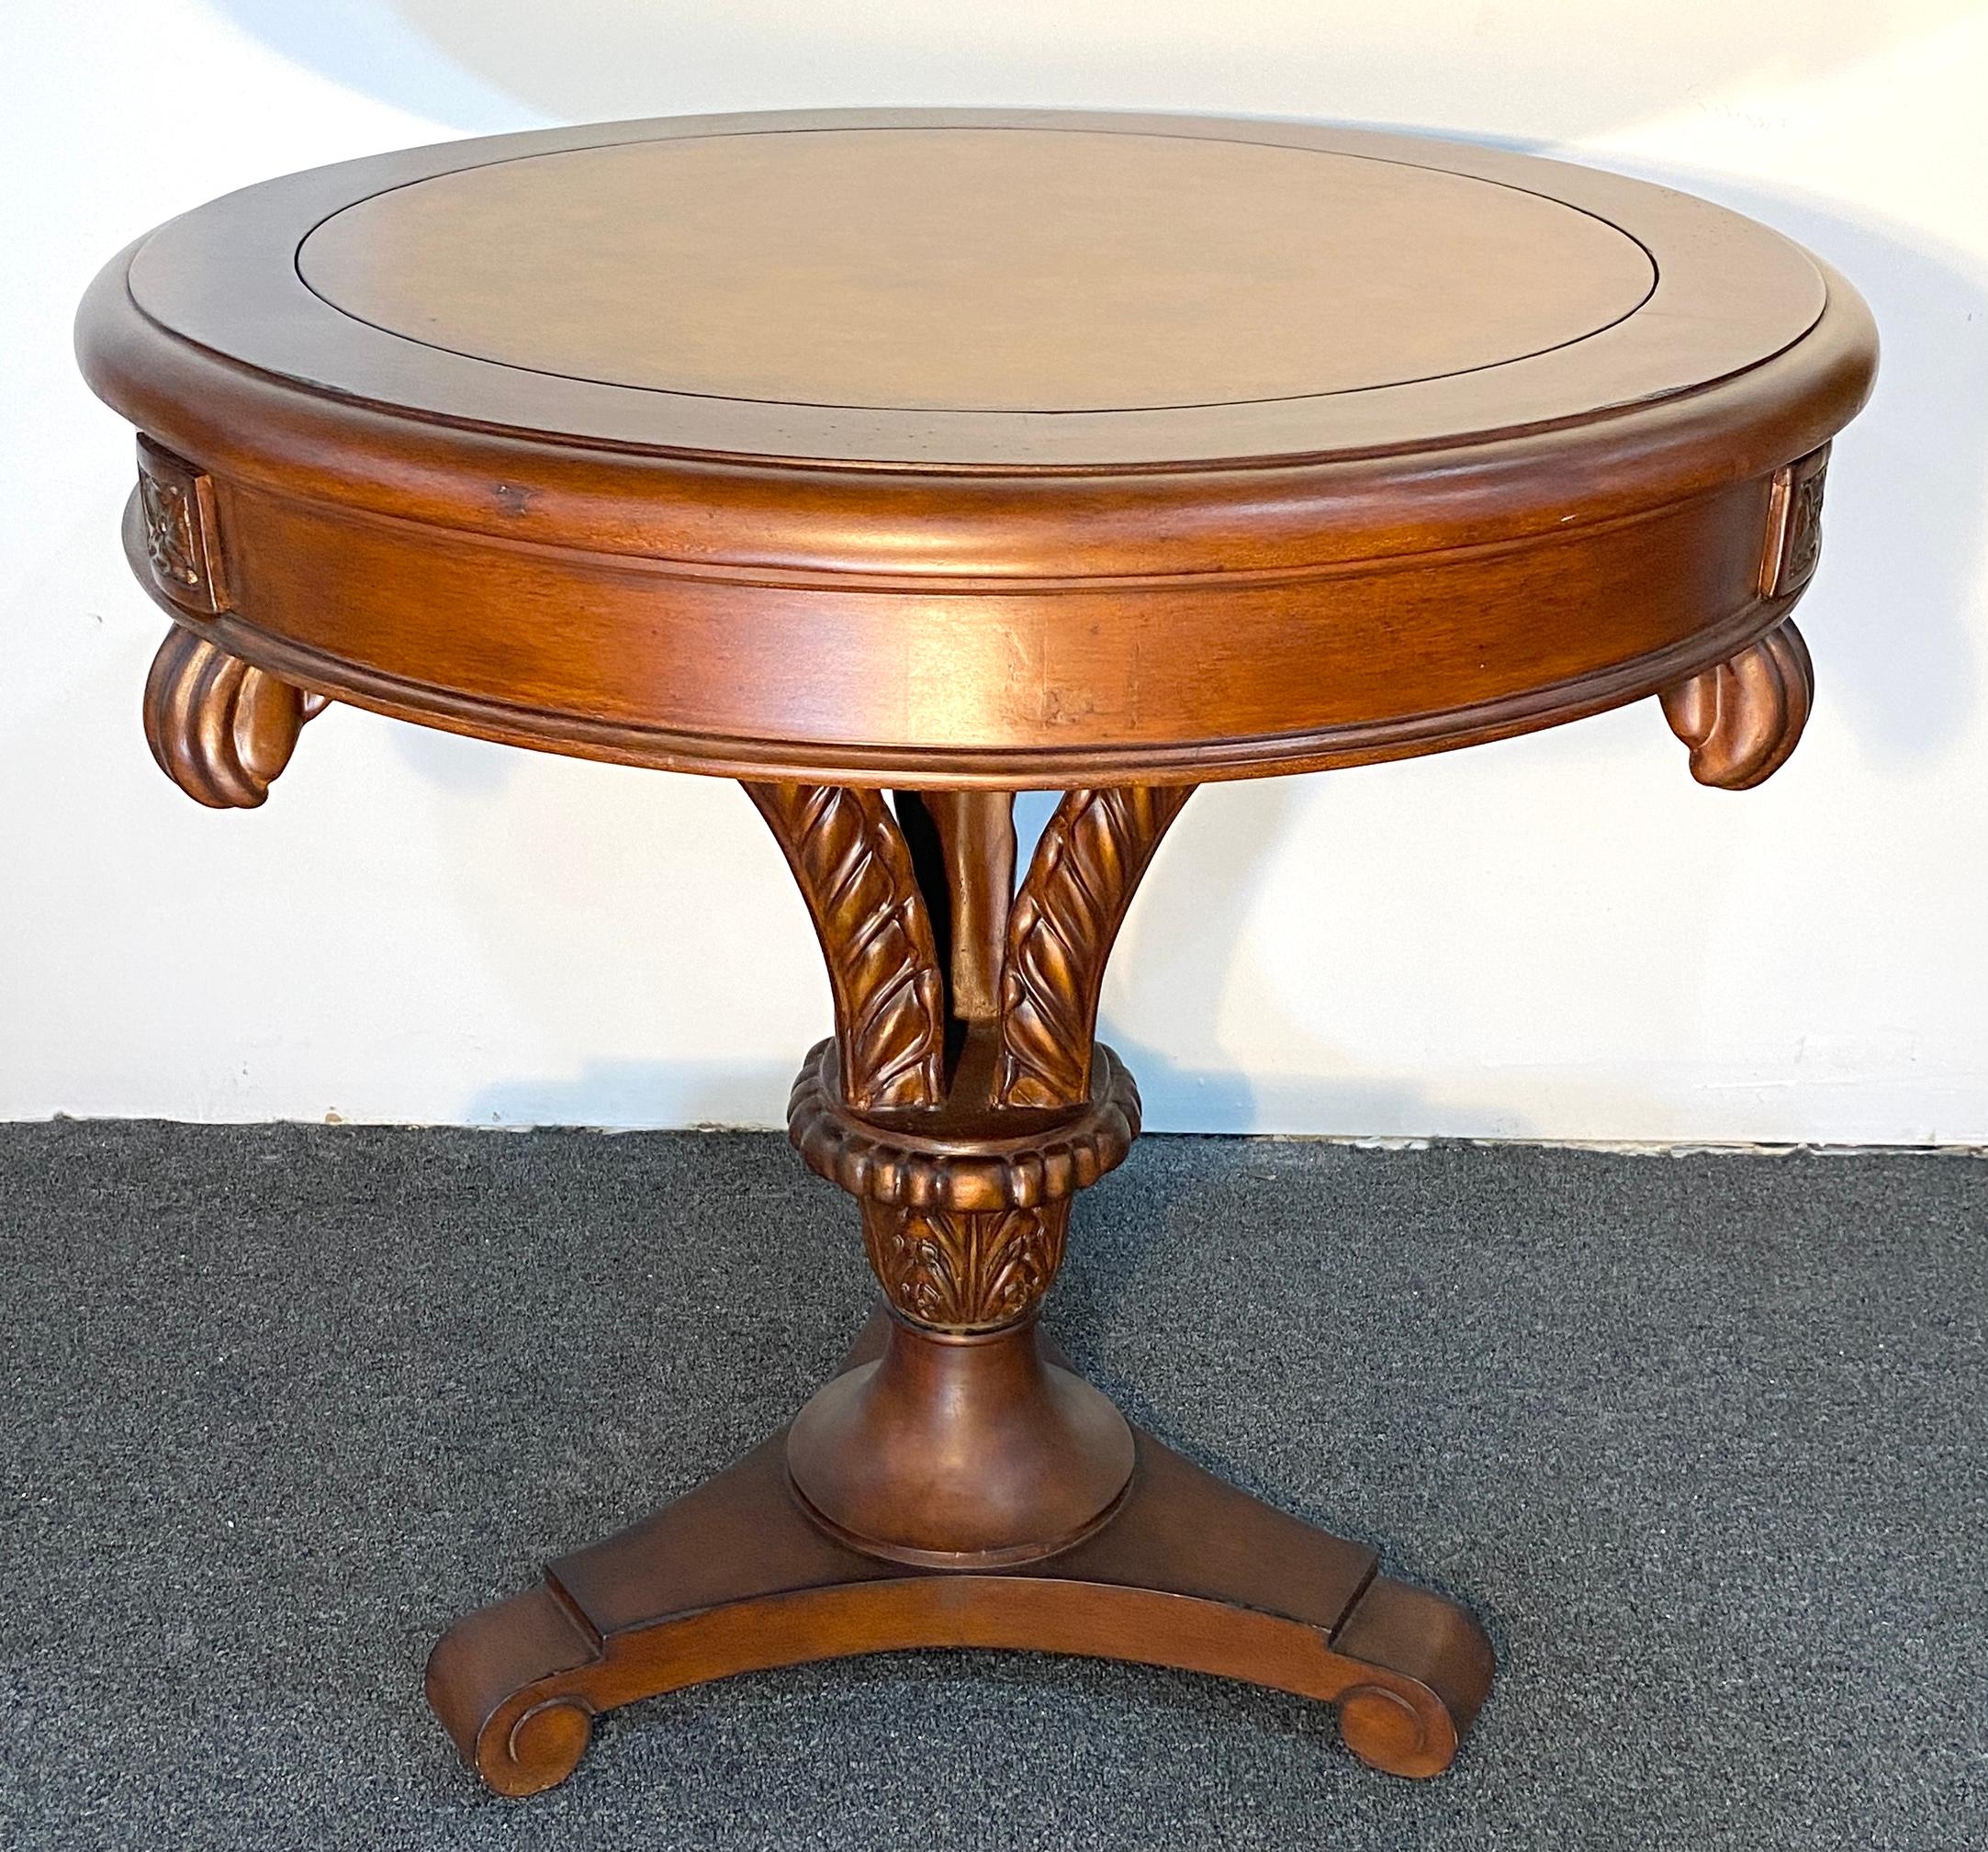 A very good quality Chippendale style center, end or side table constructed of mahogany. This side table is very well made and embodies traditional Victorian details. The inlaid leather on the top makes this a great center table to display your